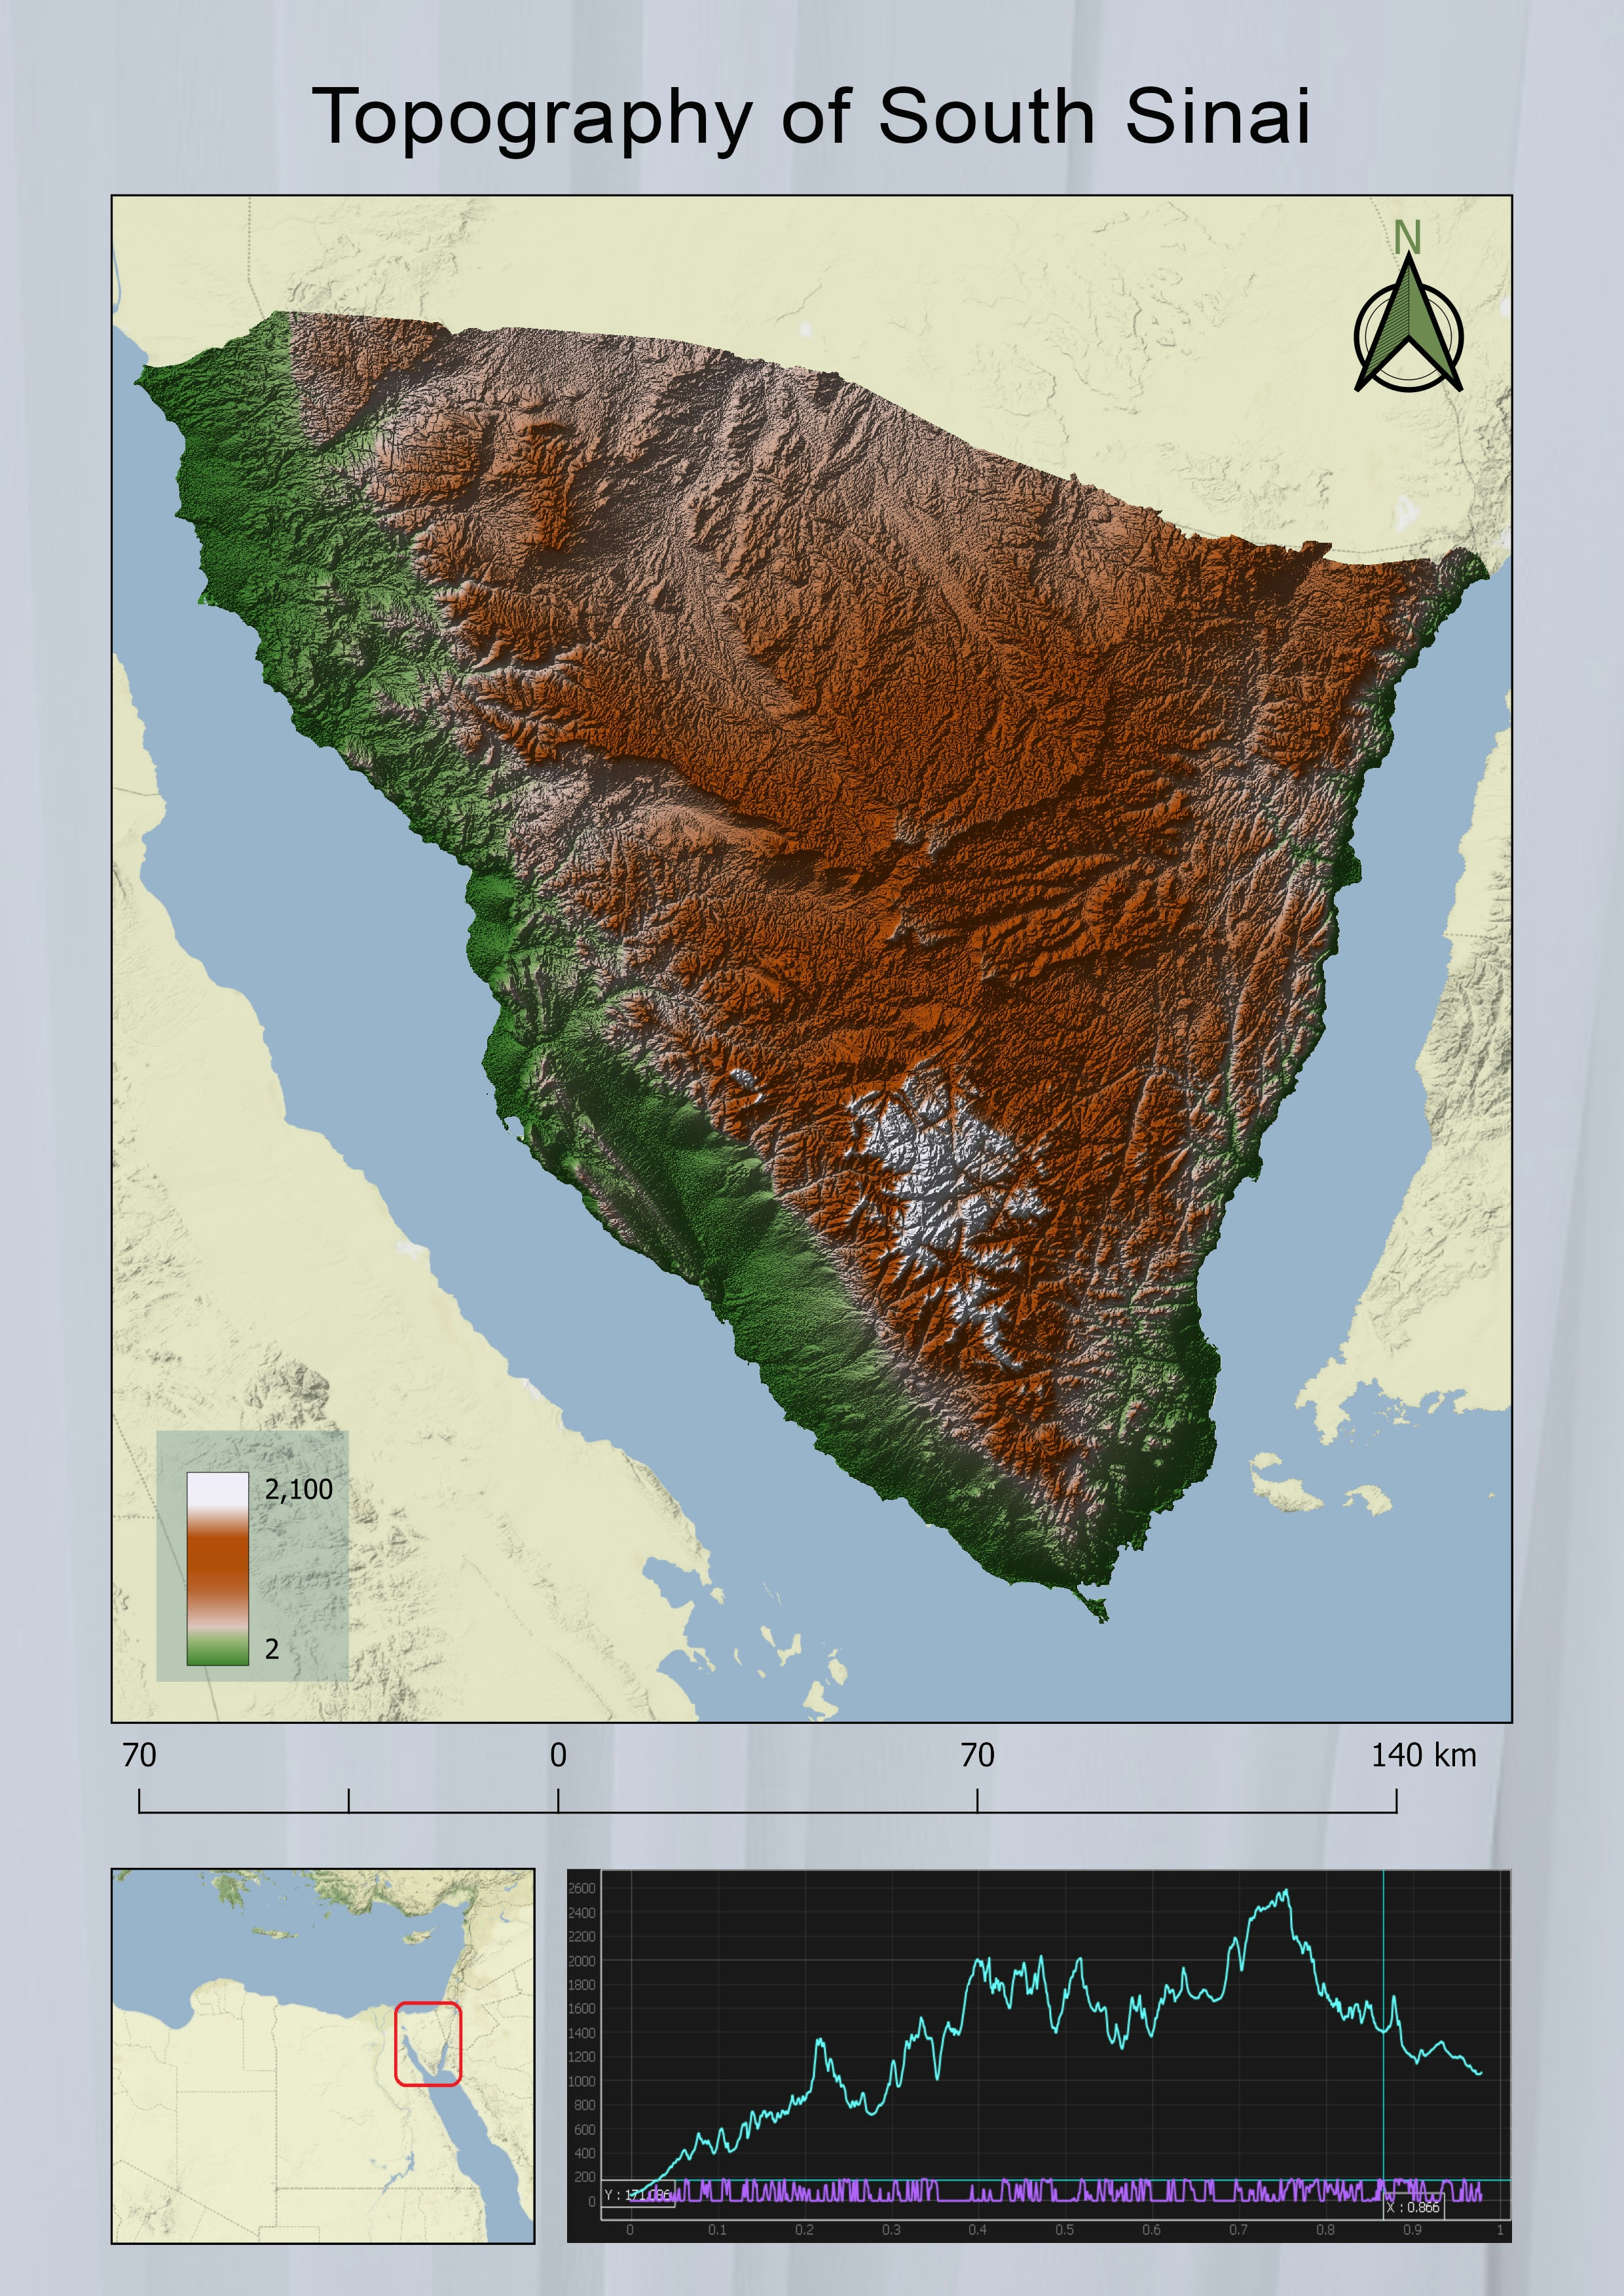 Topography of South Sinai